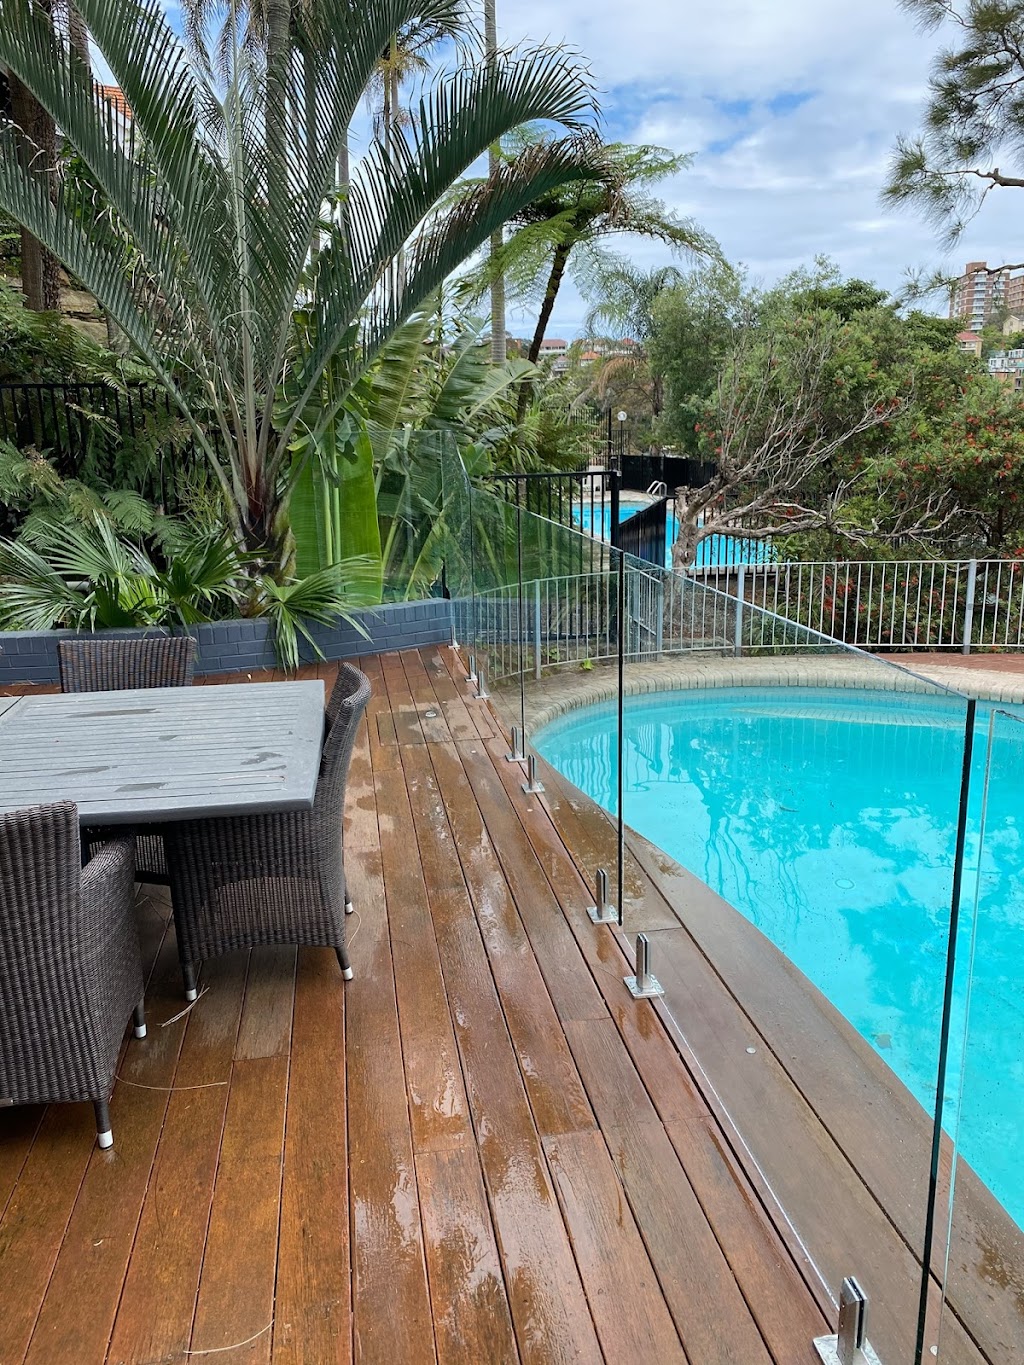 Exquisite Glass |  | Servicing all Port Macquarie, Lake Innes, Rawdon Island, Hastings, Forster Bonny Hills, Wauchope, Lake Cathie, Camden Haven, Shelly Beach, Taree Sovereign Hills, Coffs Harbour, Kempsey, Macksville, 204 Shoreline Dr, Riverside NSW 2444, Australia | 0414377325 OR +61 414 377 325